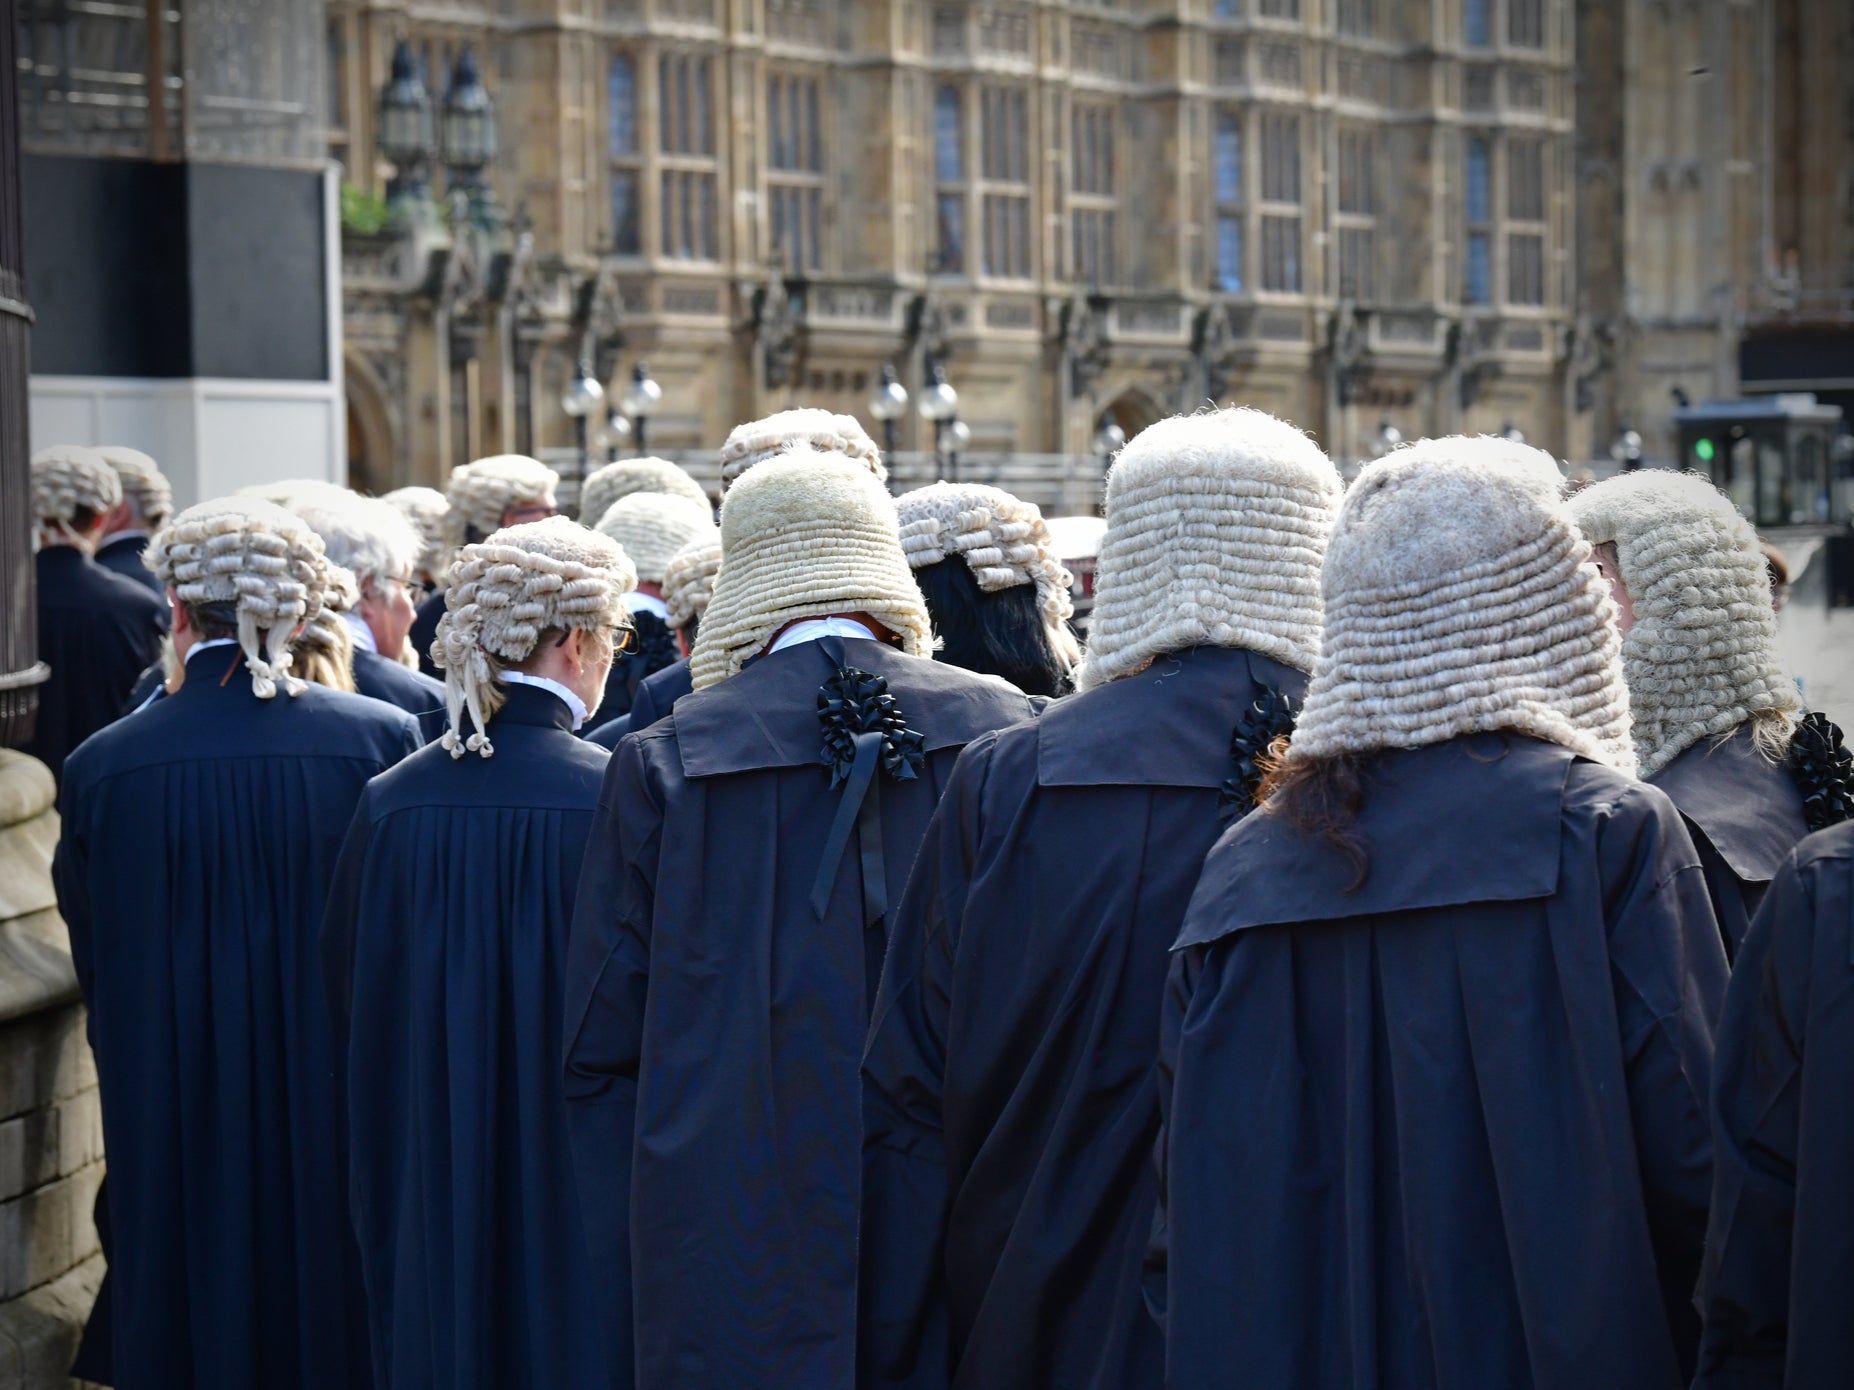 ‘No, the sky will not fall in if we abandon the wig,’ barrister says